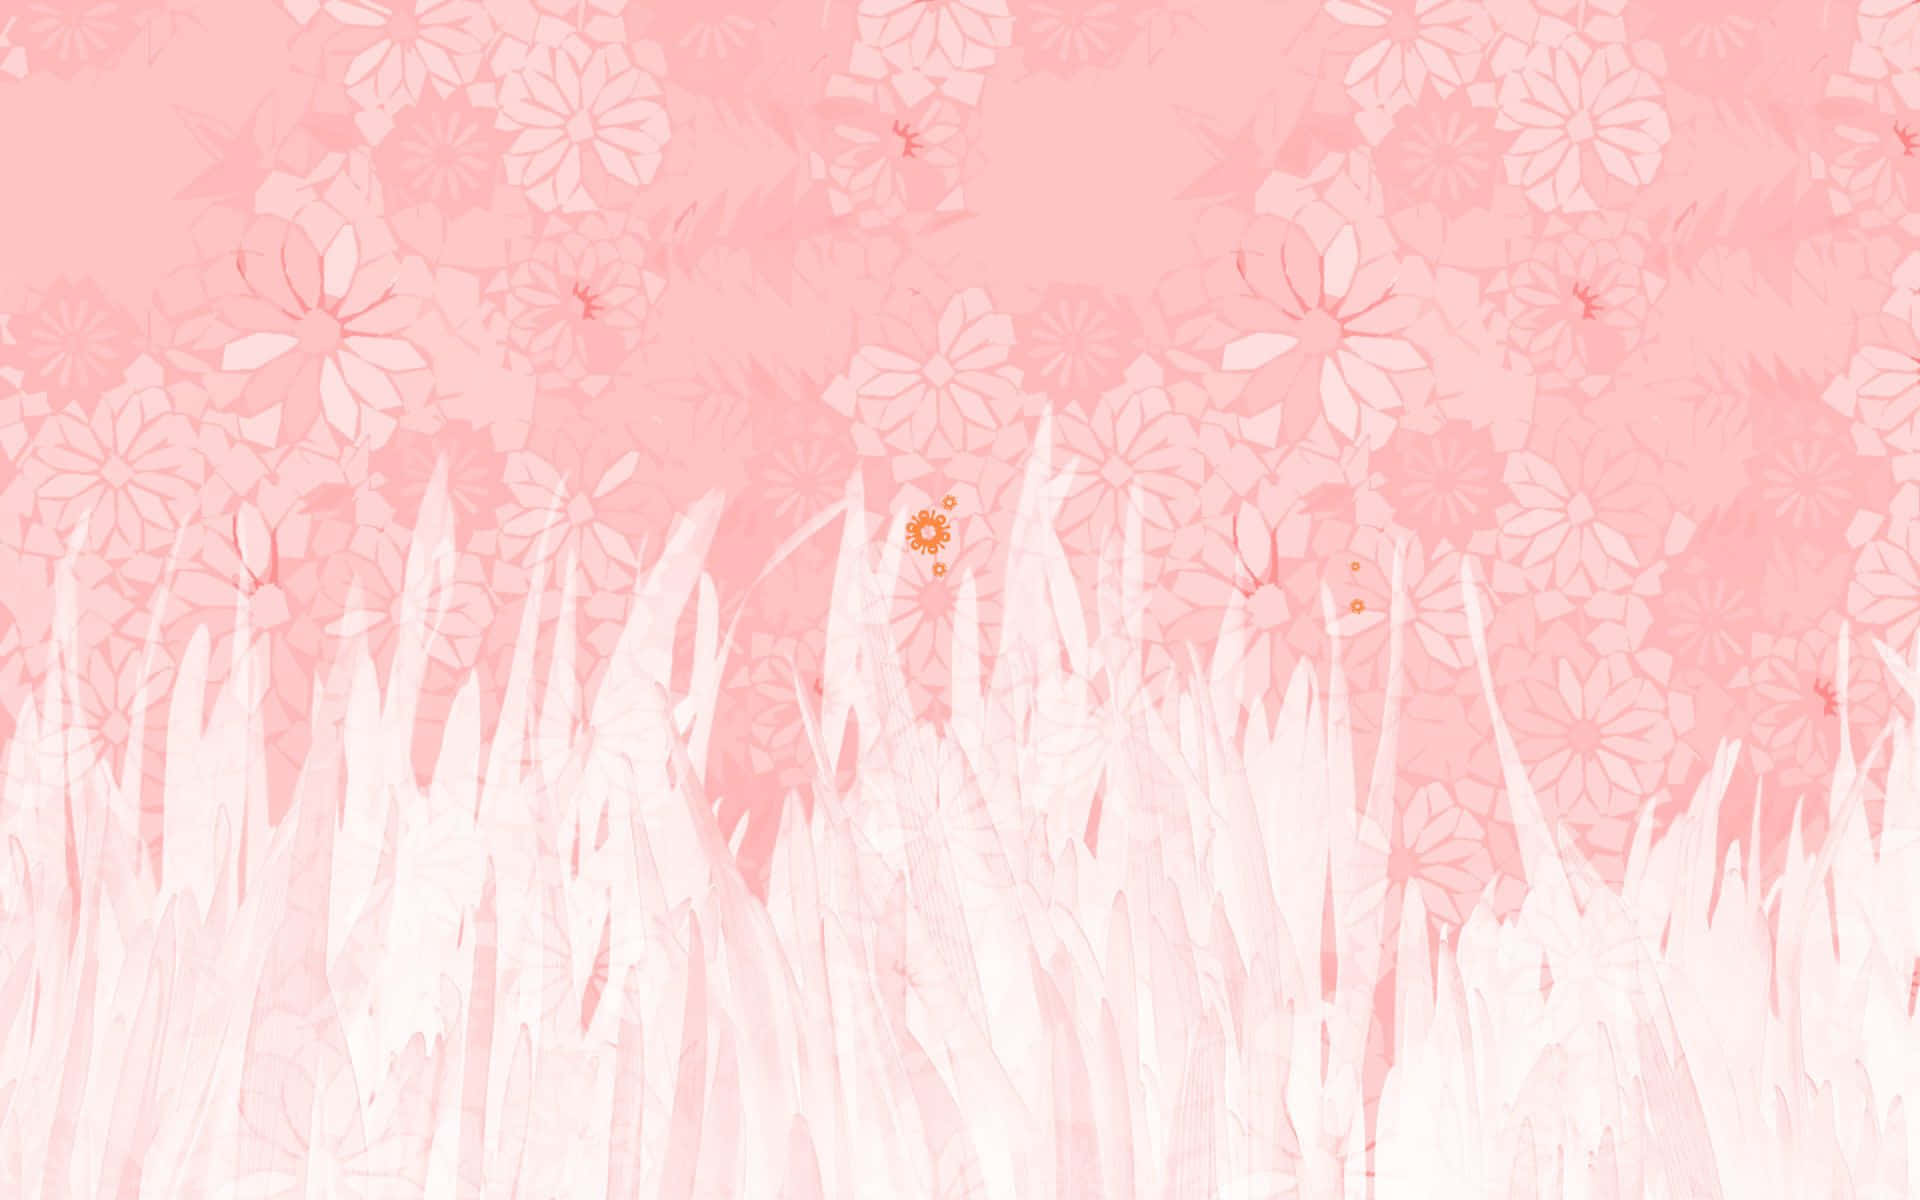 Soft Pink Floral Grass Aesthetic Wallpaper